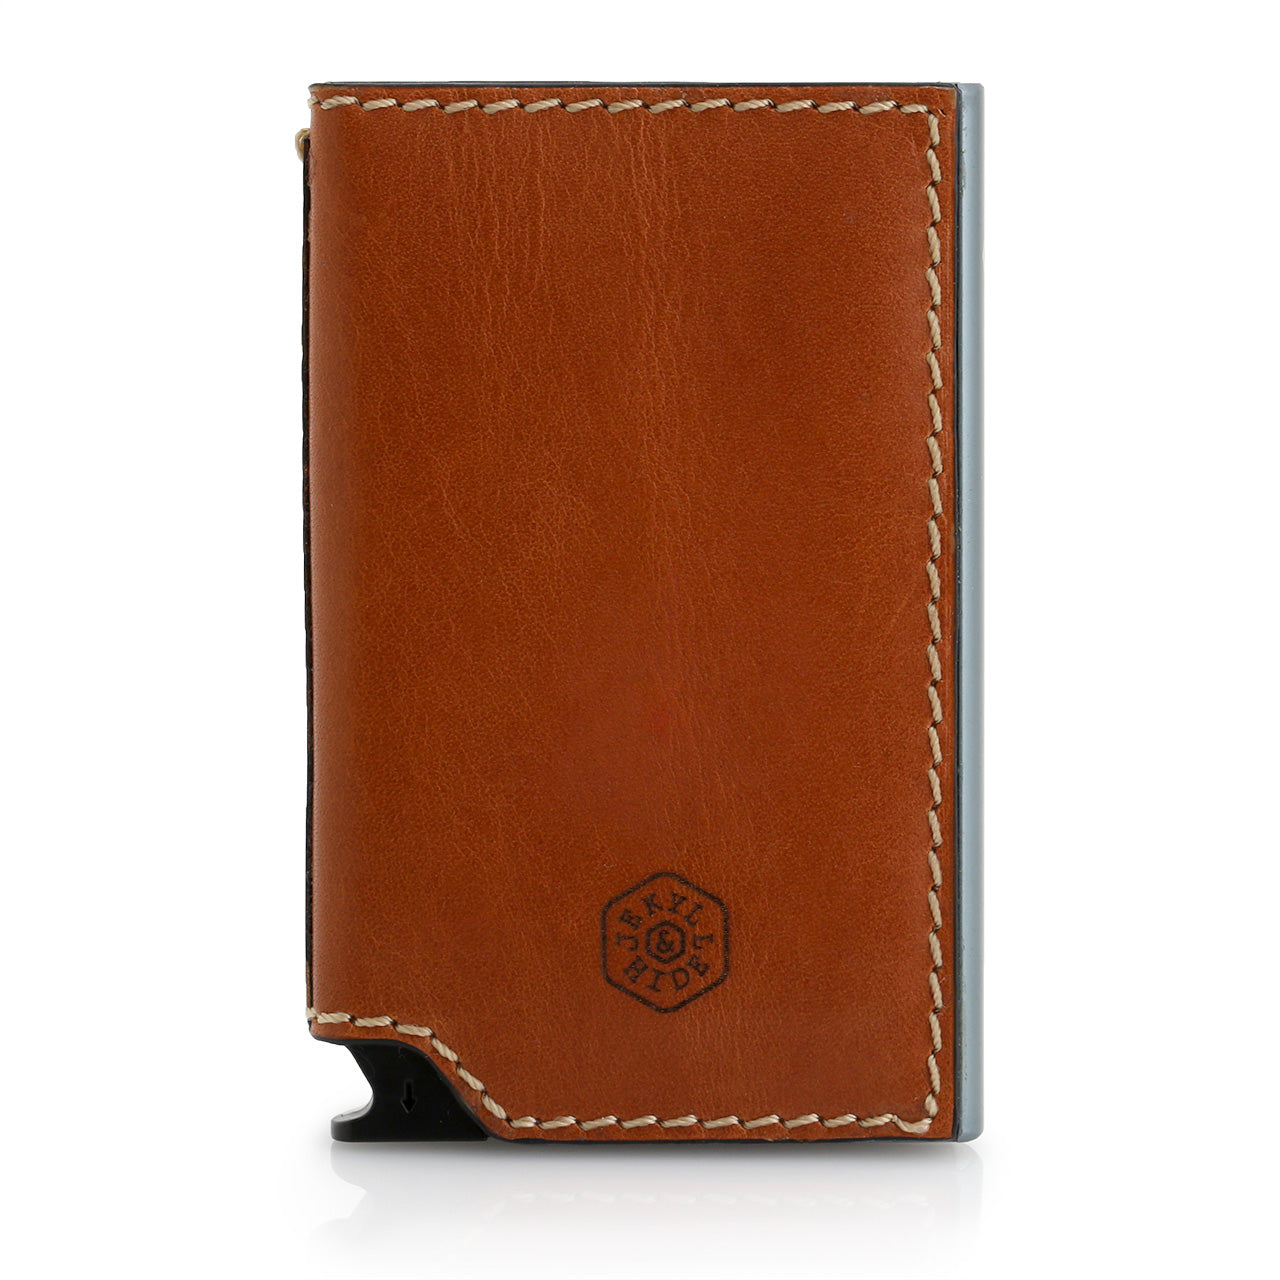 Jekyll & Hide Texas Zip Around Leather Wallet - Giobags